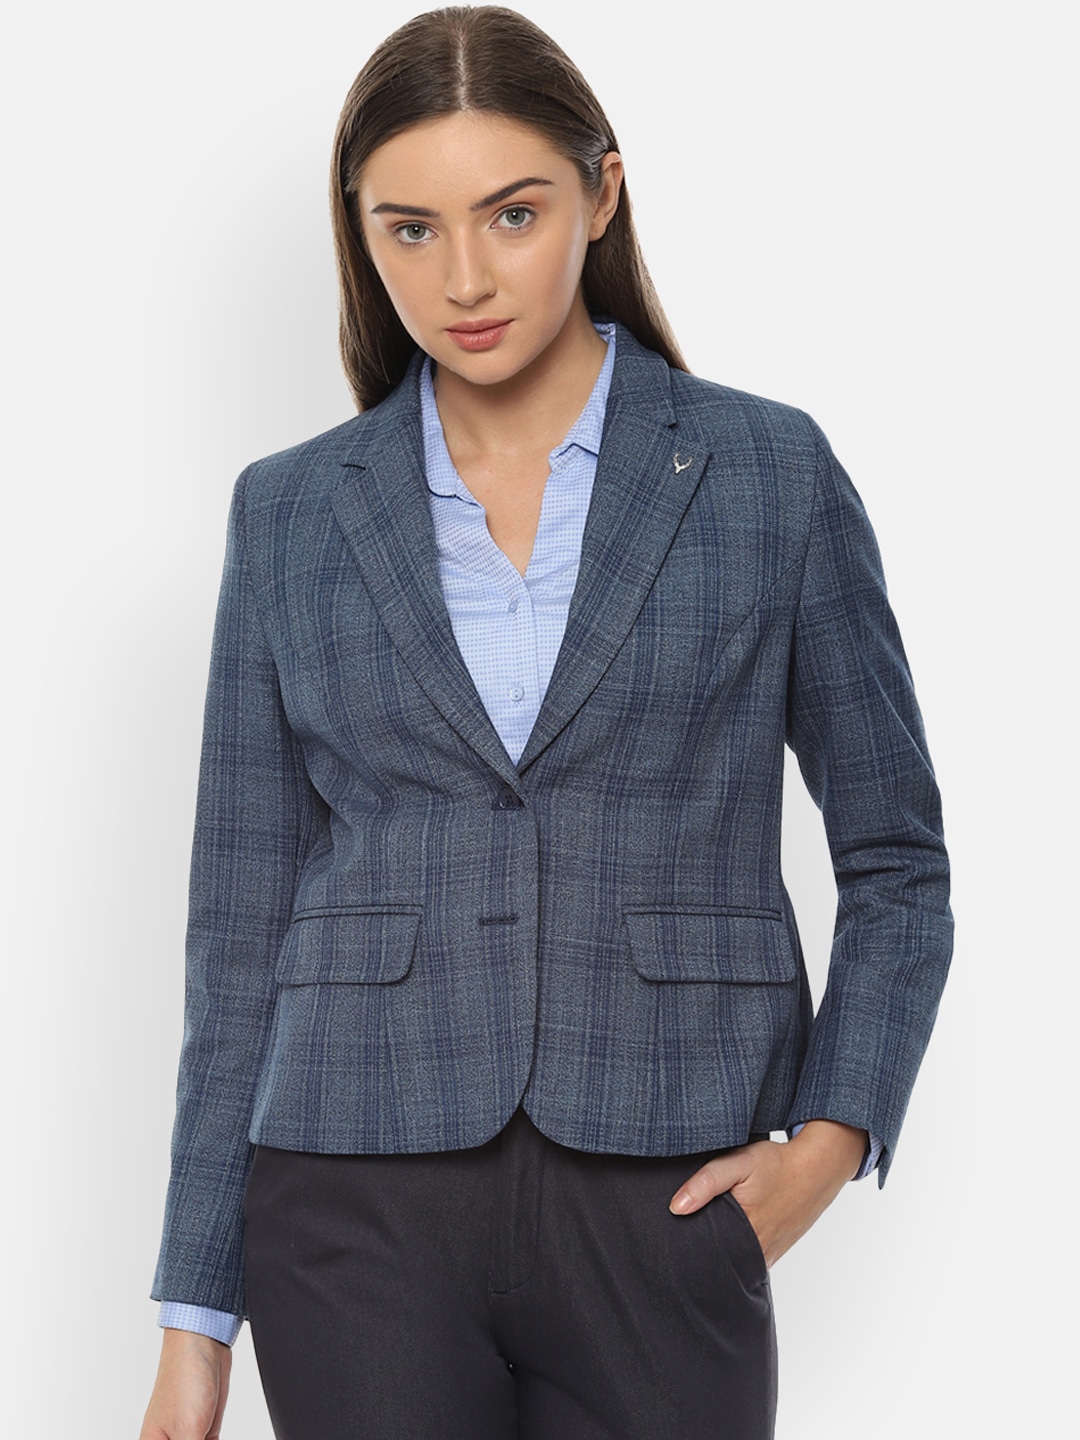 Clothing Blazers | Allen Solly Woman Blue Checked Regular-Fit Single-Breasted Blazer - OU53928